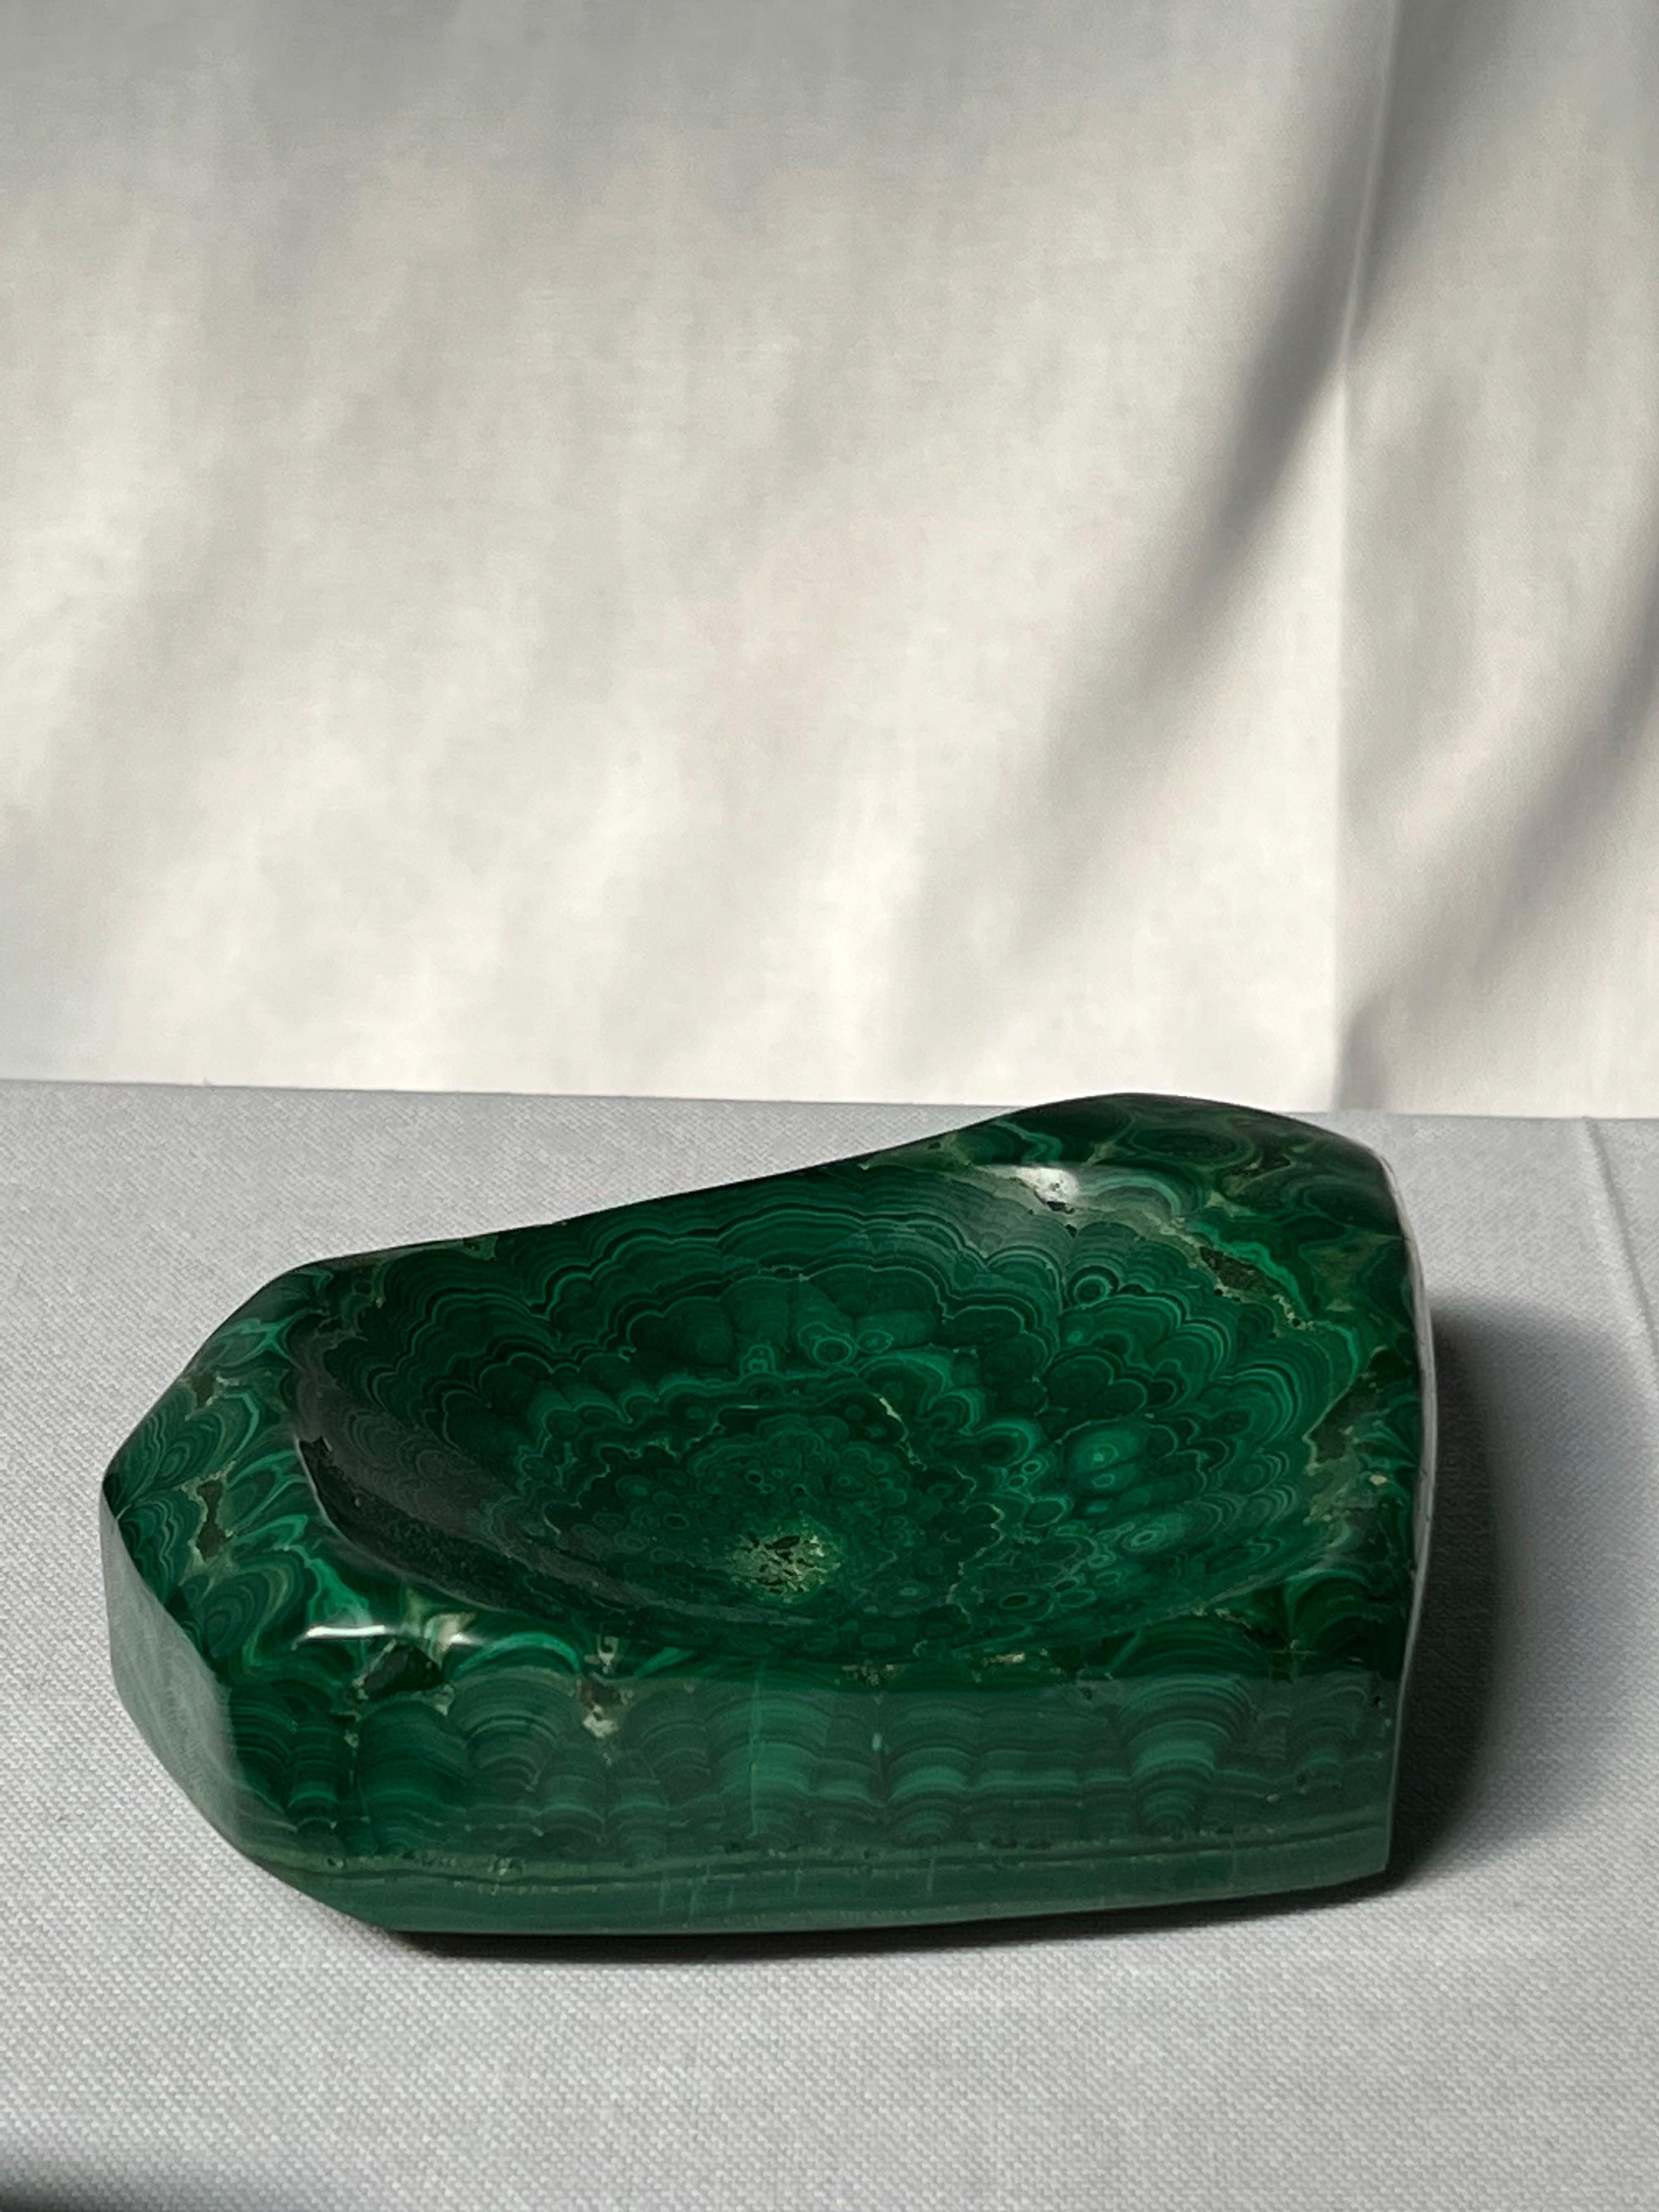 Unique massive malachite from copper mines in old began Congo. Natural stone. Perfect as decorative object or for cigars and cigarettes. It is a mix between brutalist and polished